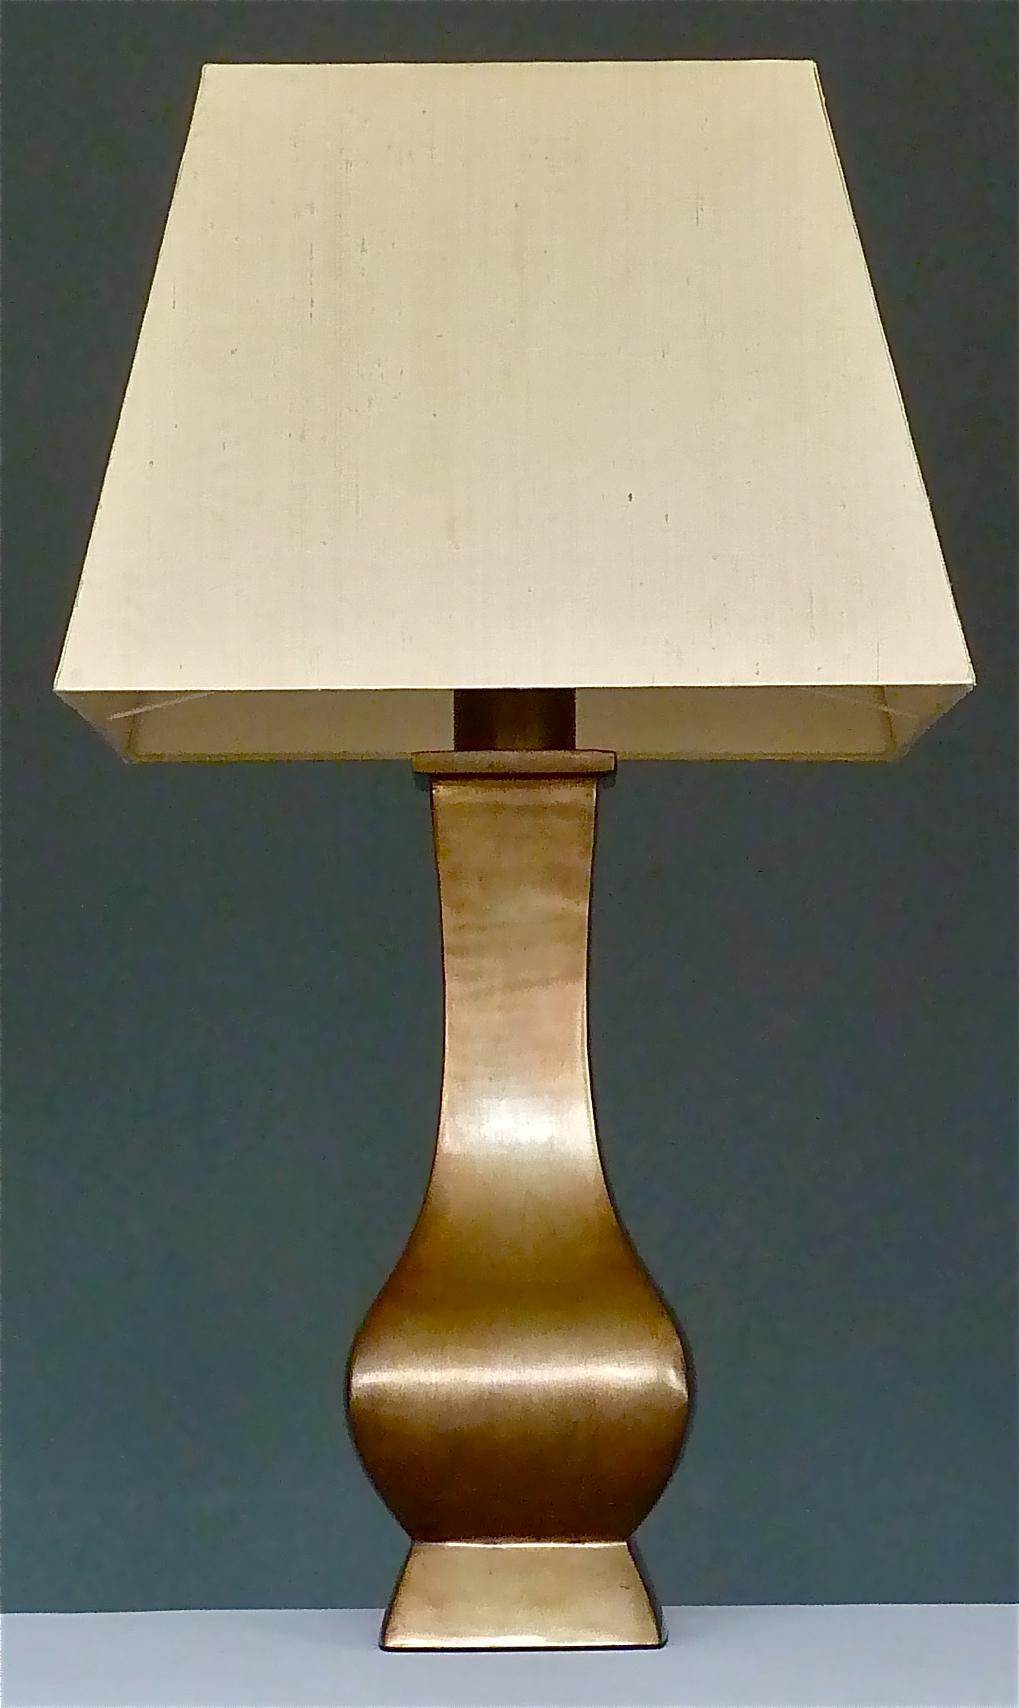 French Huge Patinated Bronze Table Lamp Pergay Crespi Maison Jansen Style France 1970s For Sale